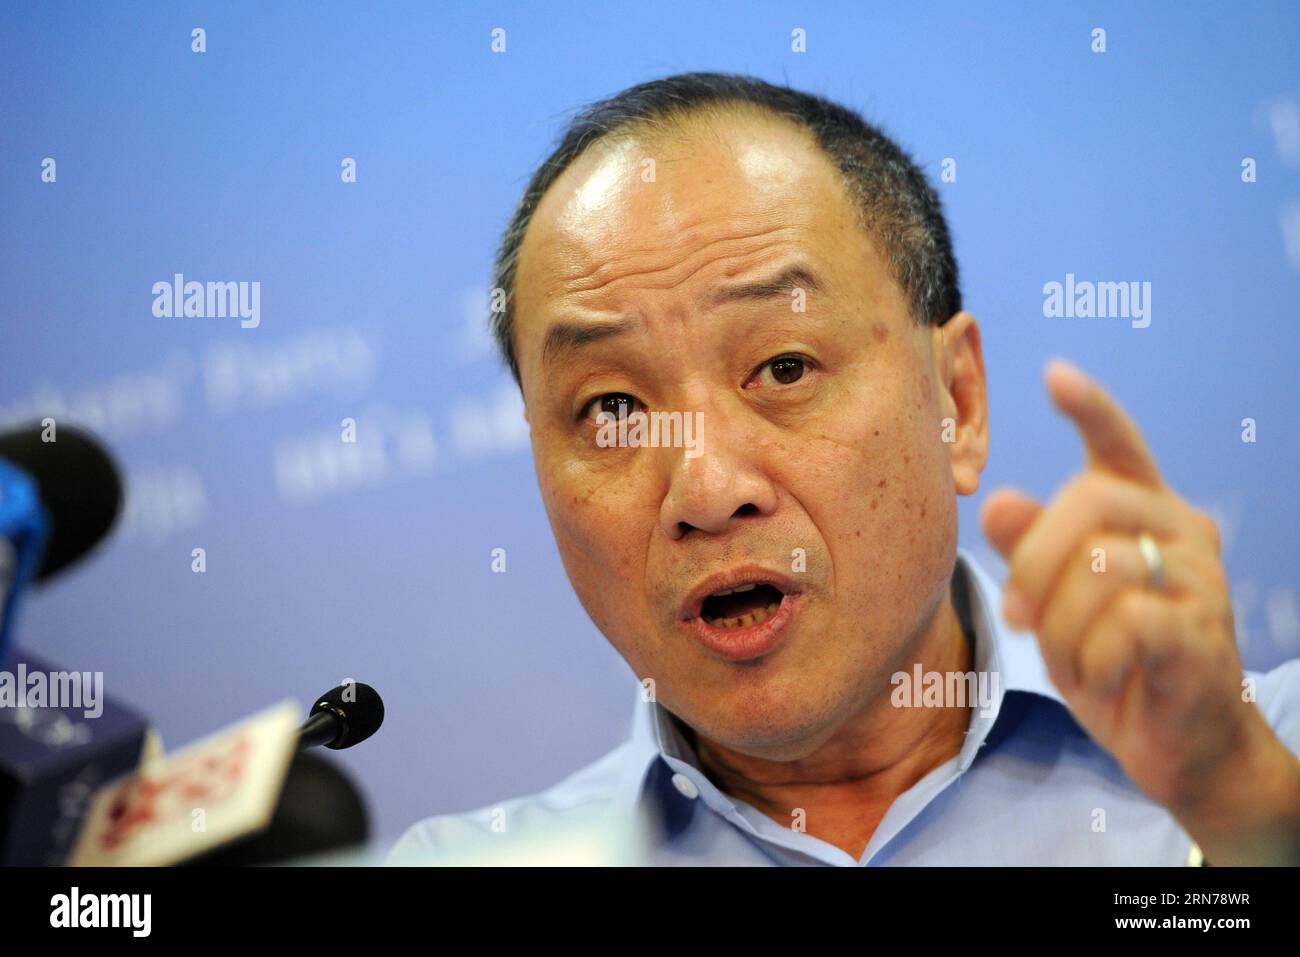 (150826) -- SINGAPORE, Aug. 26, 2015 -- Singapore s Workers Party (WP) s Secretary-General Low Thia Khiang attends a press conference held in the WP s head office on Aug. 26, 2015. The WP held a press conference in Singapore on Wednesday to introduce four new candidates contesting in the upcoming general elections. ) (lrz) SINGAPORE-WORKERS PARTY-PRESS CONFERENCE-NEW CANDIDATES ThenxChihxWey PUBLICATIONxNOTxINxCHN   150826 Singapore Aug 26 2015 Singapore S Workers Party wp S Secretary General Low Thia Khiang Attends a Press Conference Hero in The wp S Head Office ON Aug 26 2015 The wp Hero a P Stock Photo